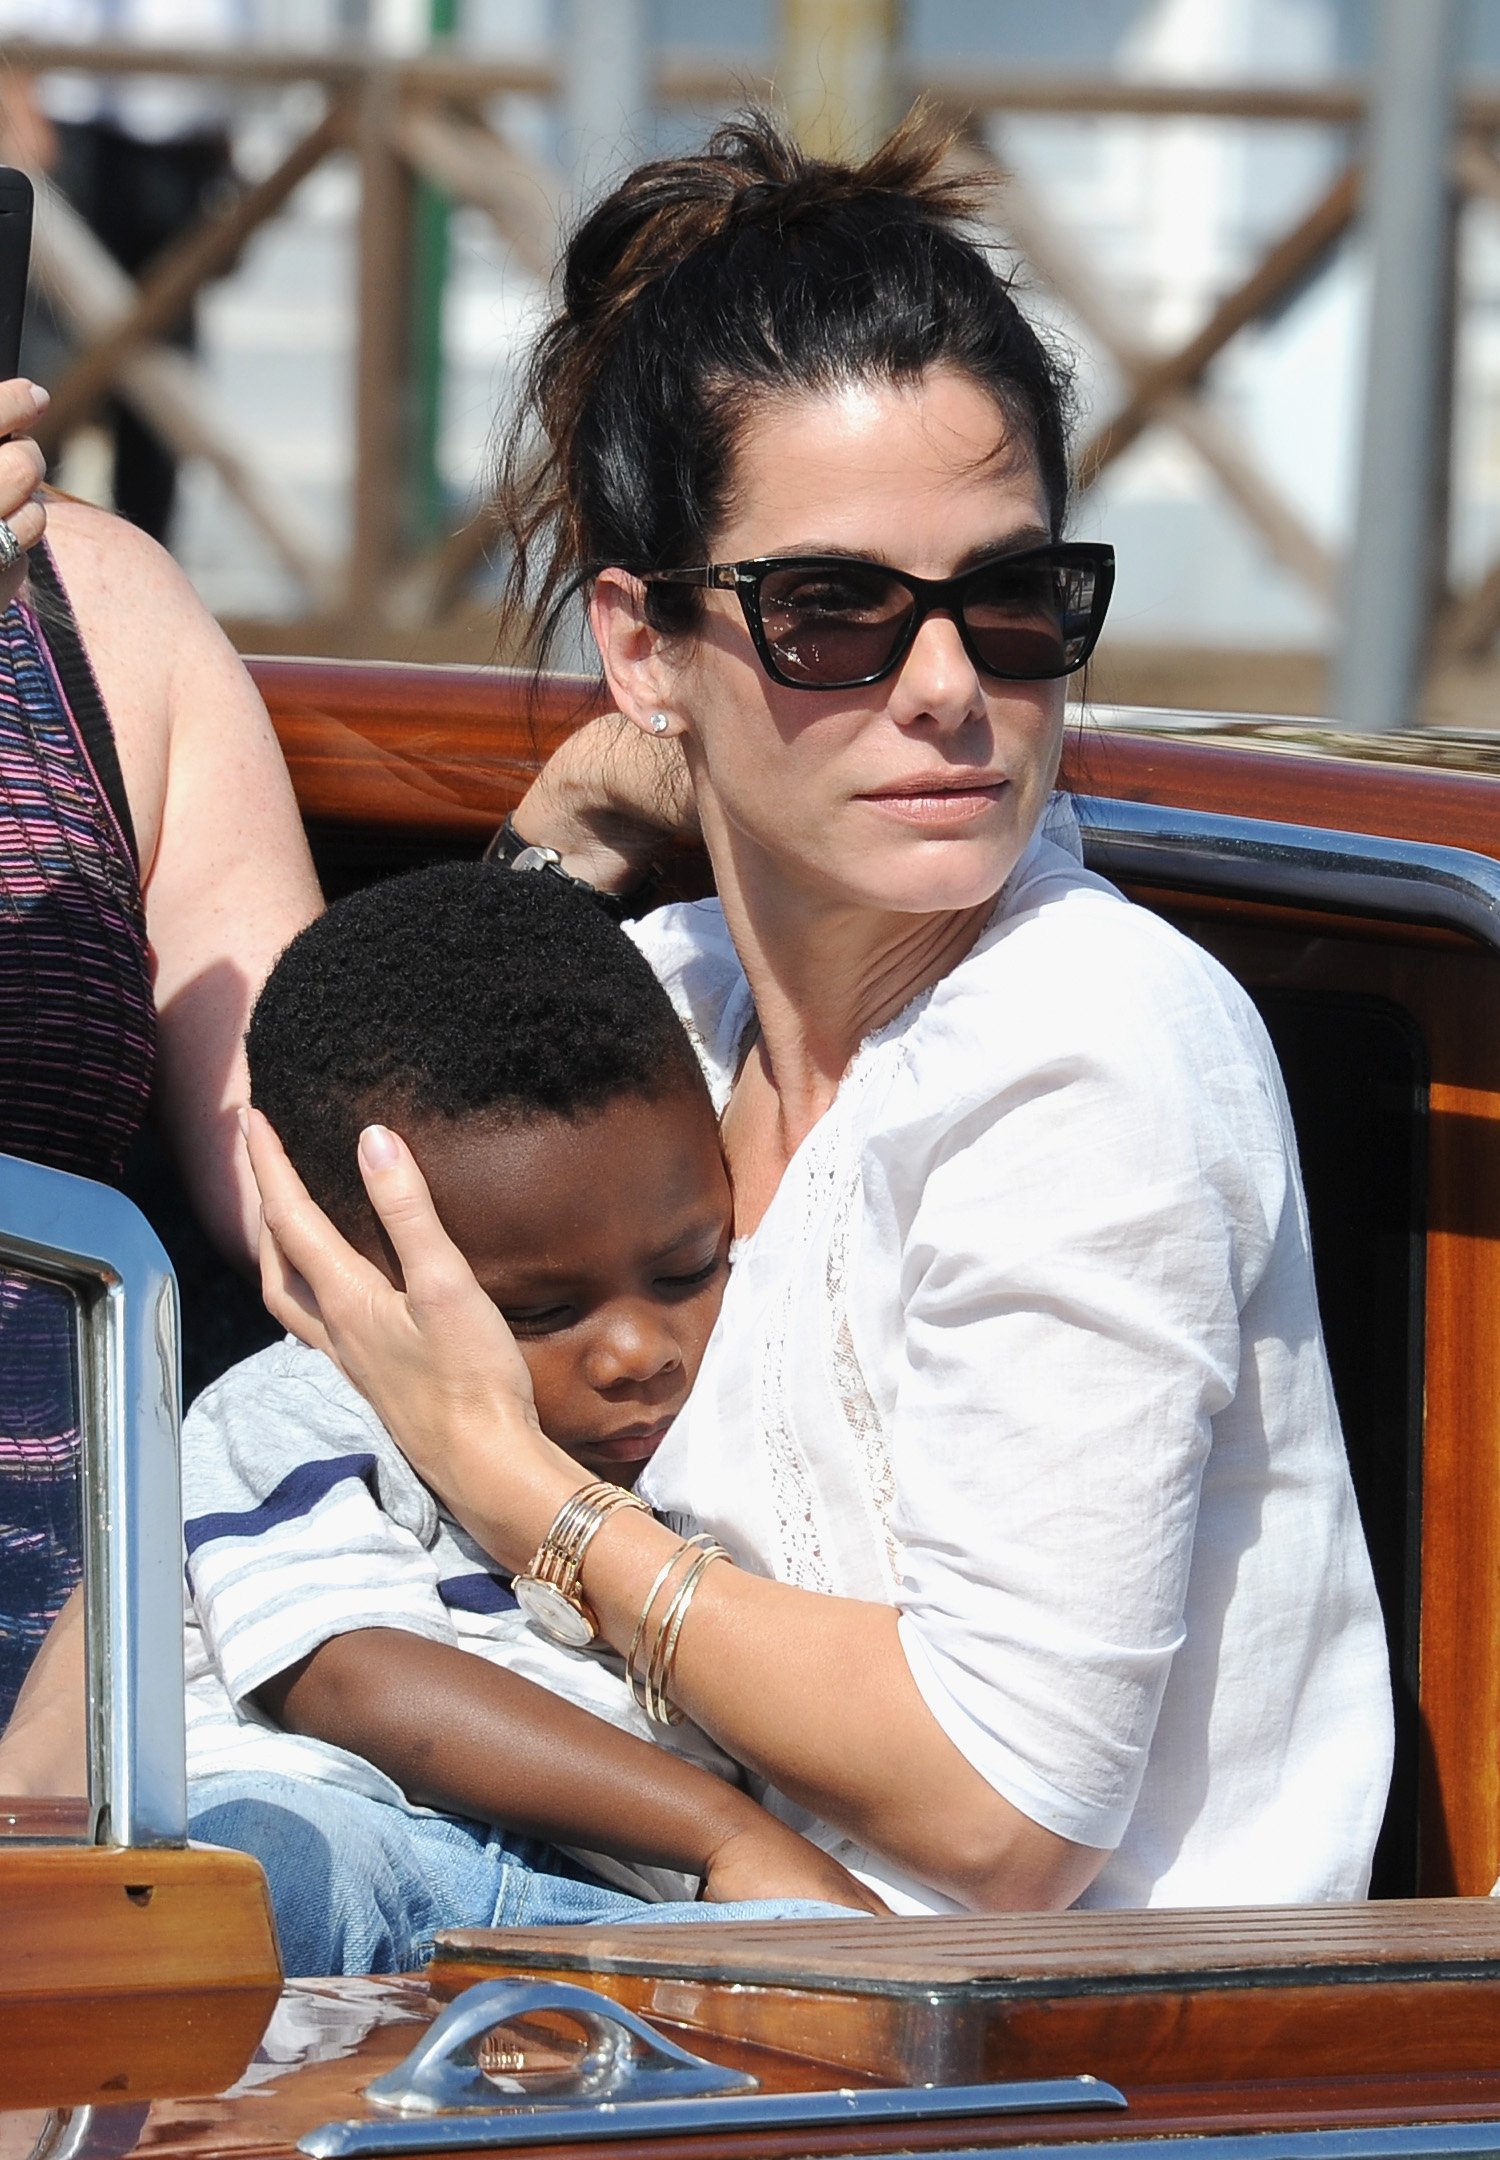 Sandra Bullock and son Louis Bullock during the 70th Venice International Film Festival on August 27, 2013 in Venice, Italy. / Source: Getty Images